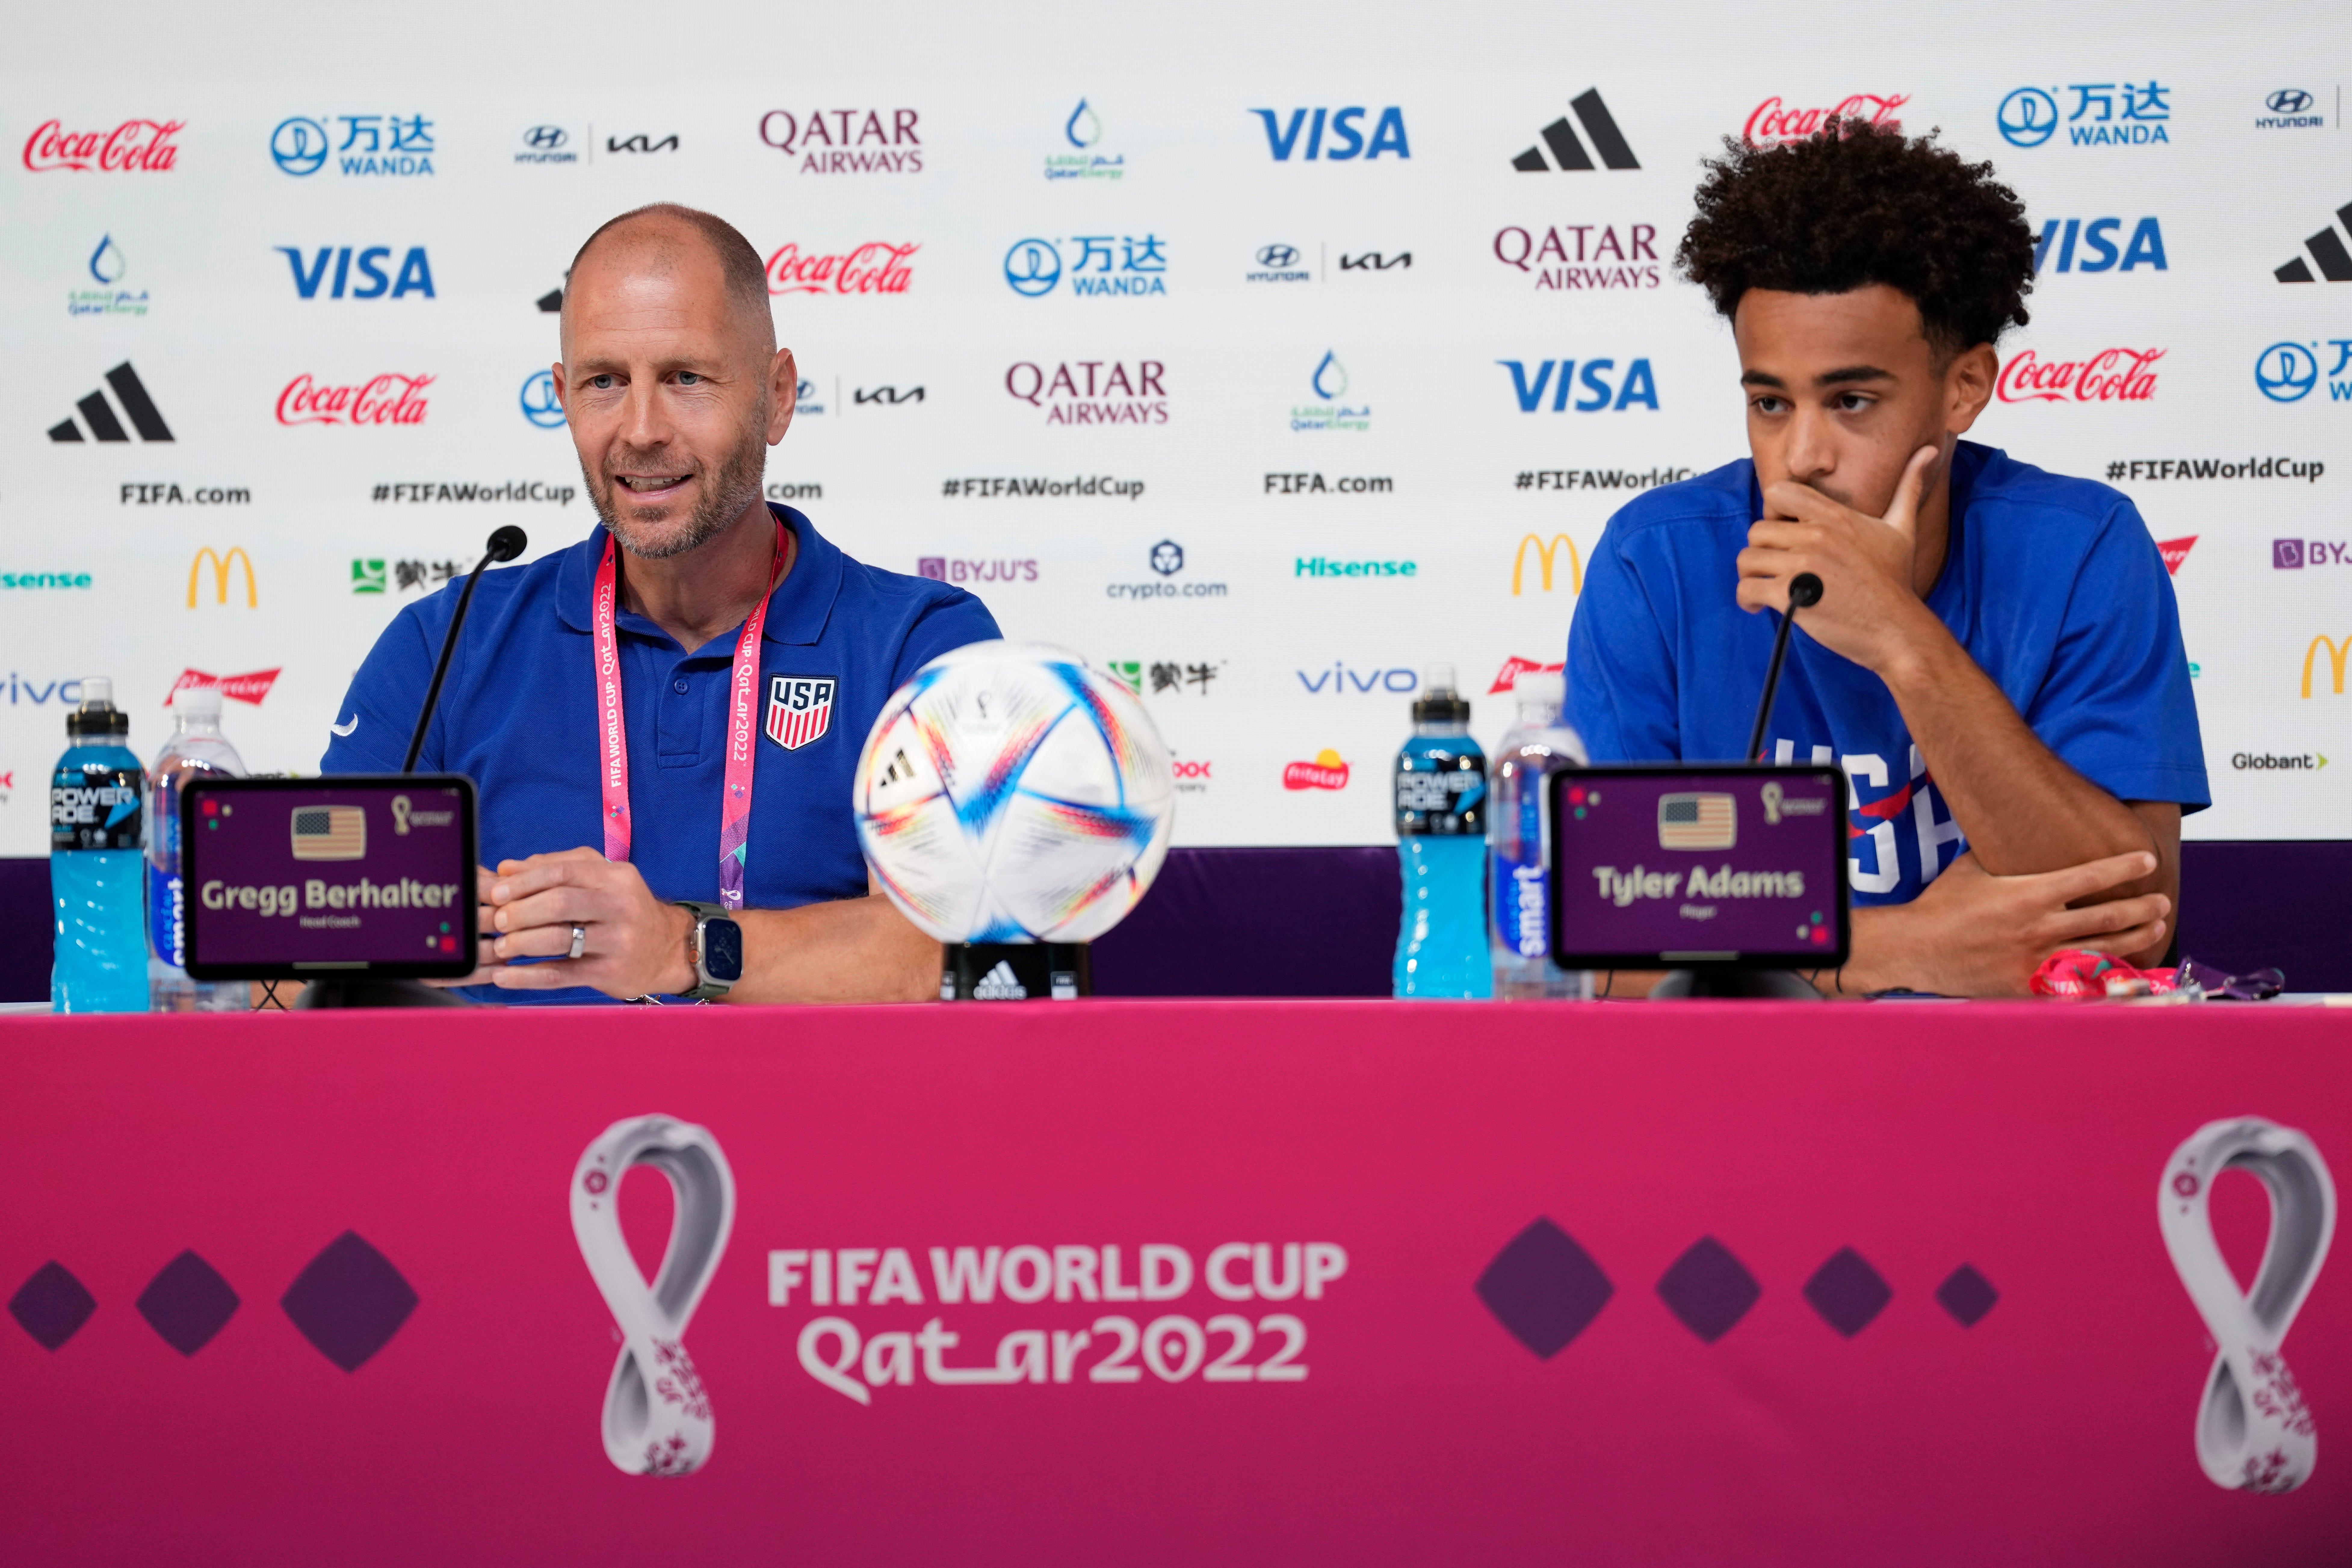 Head coach Gregg Berhalter, left, and Tyler Adams, both of the United States attend a press conference on the eve of the round of 16 World Cup soccer match between the Netherlands and the United States at Kalifa International Stadium, in Doha, Qatar, Friday, Dec. 2, 2022. (AP Photo/Ashley Landis)